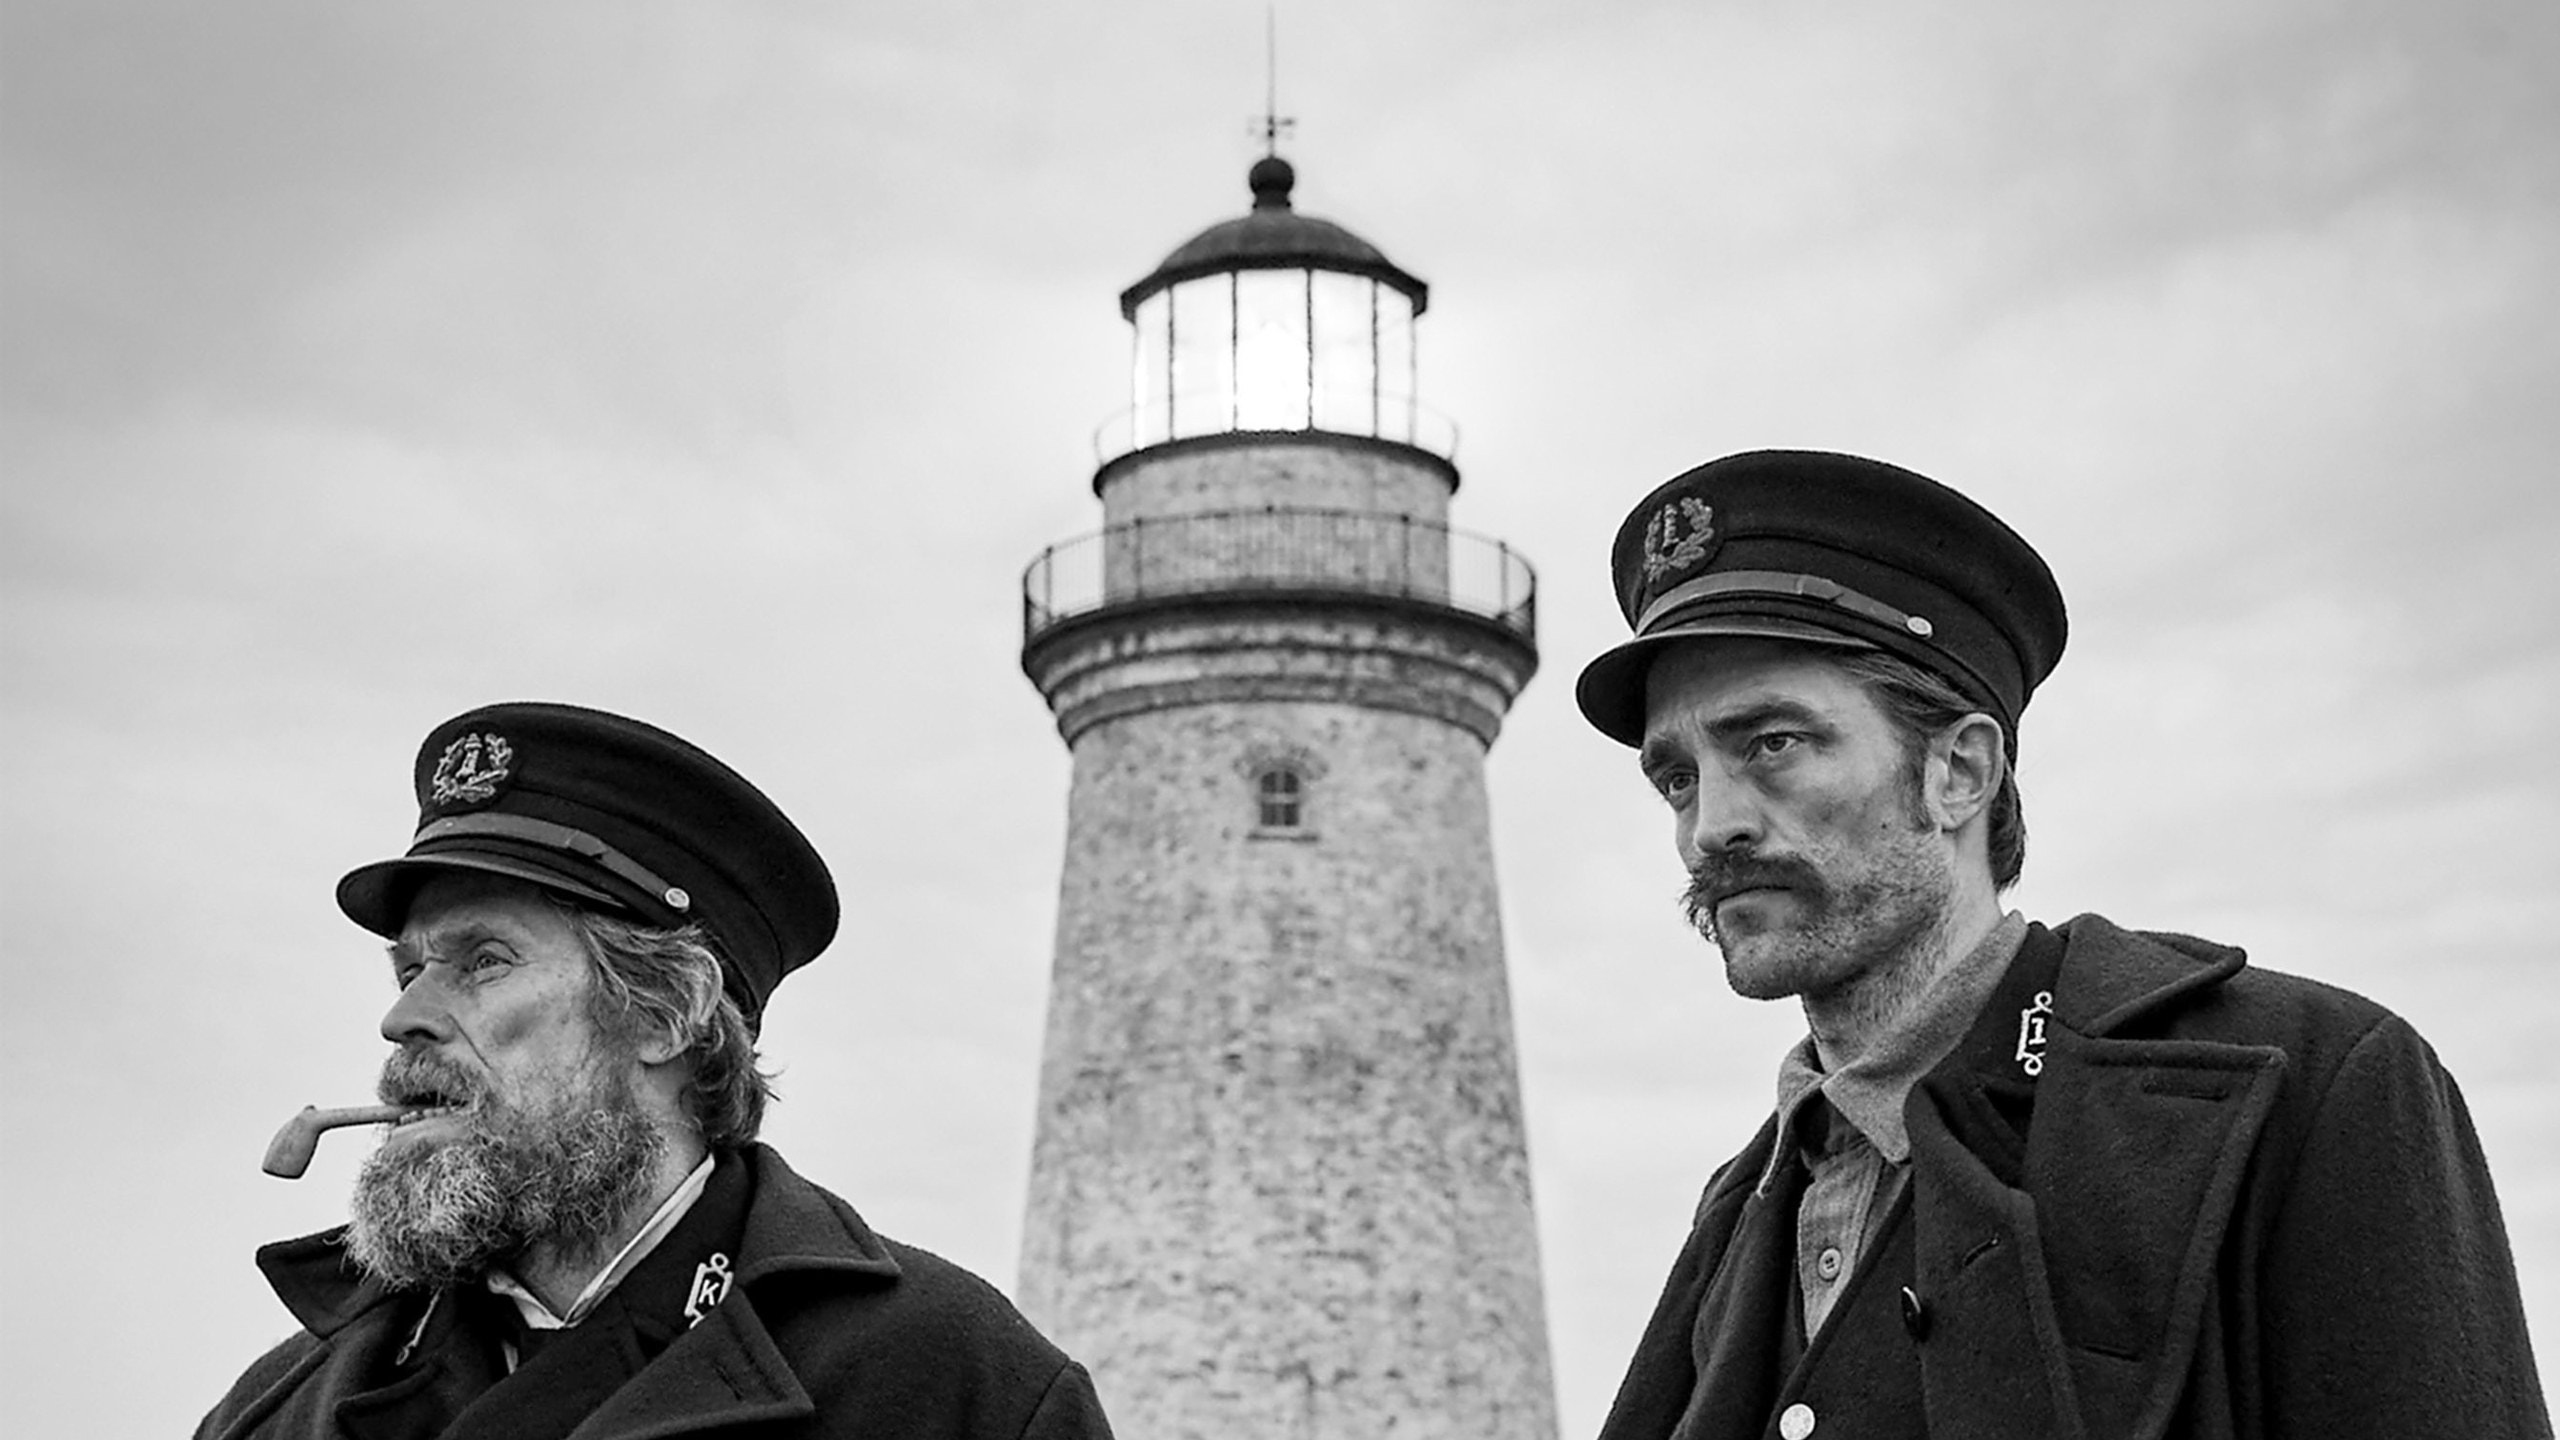 Where To Stream ‘The Lighthouse’?